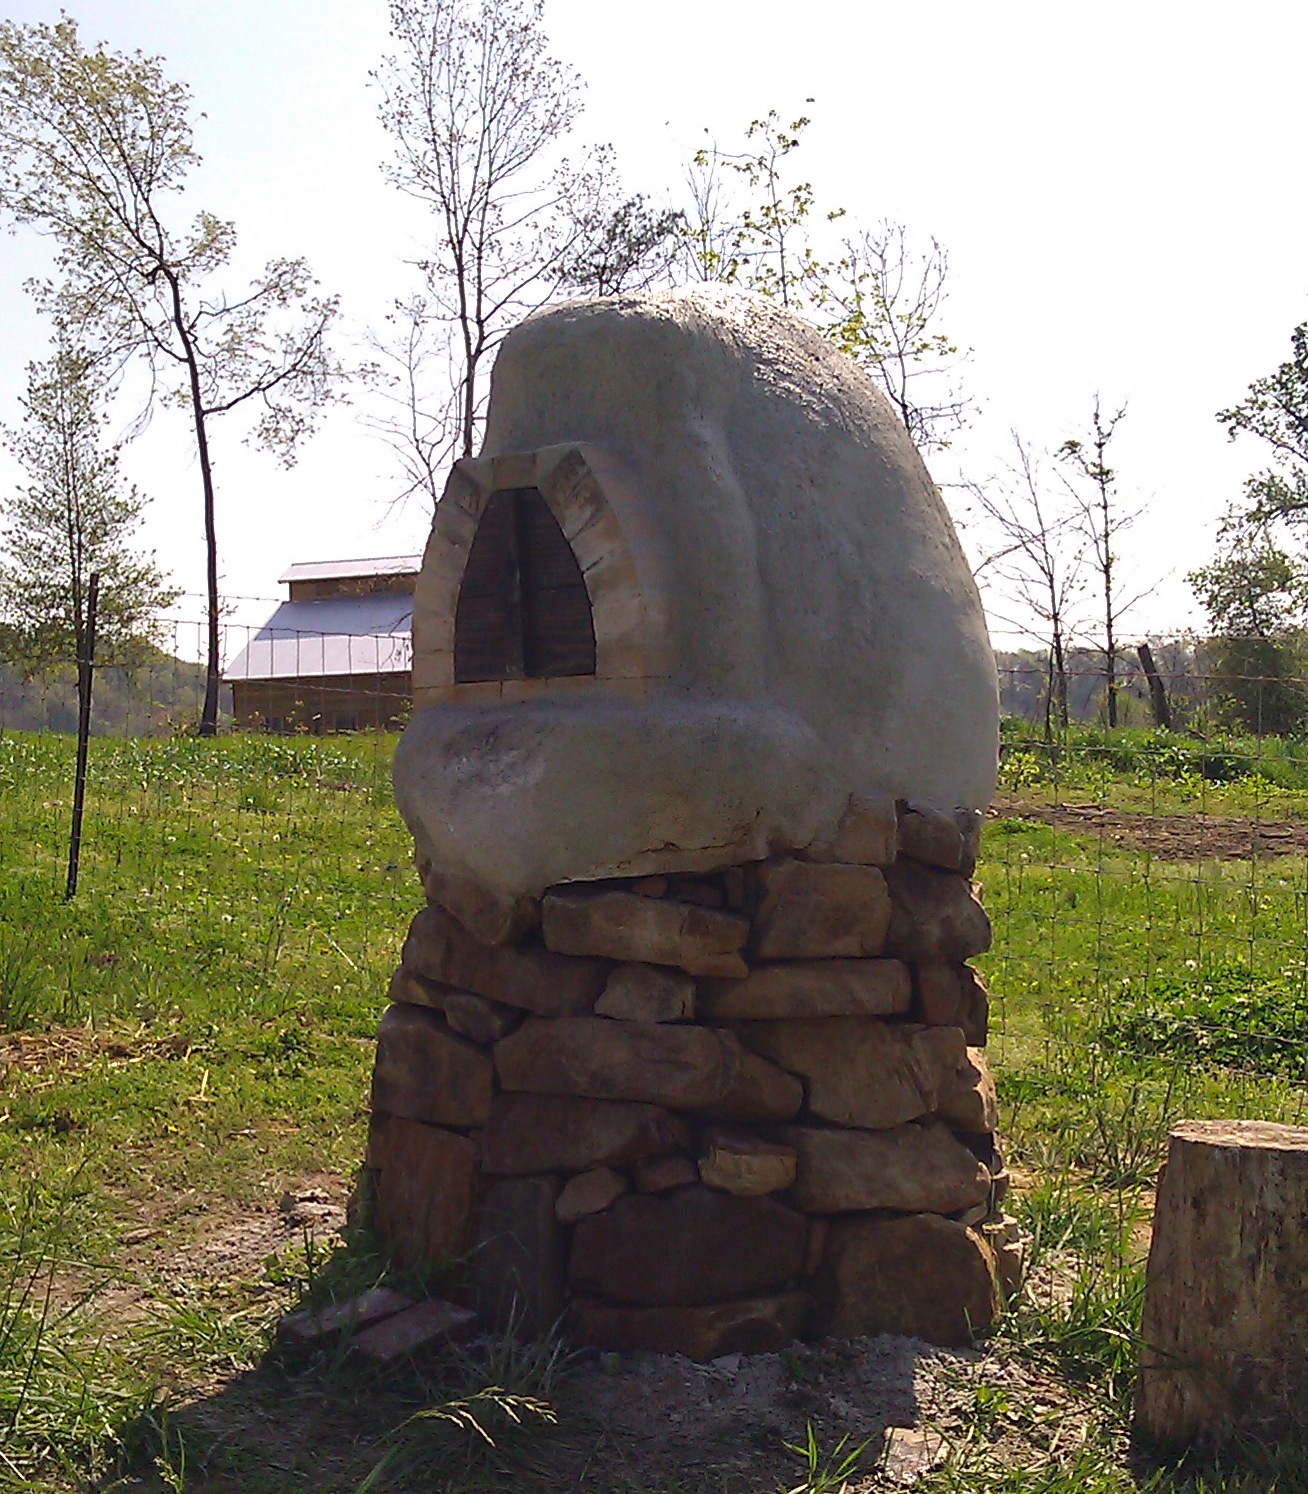 Cob Ovens Simplified – Part One